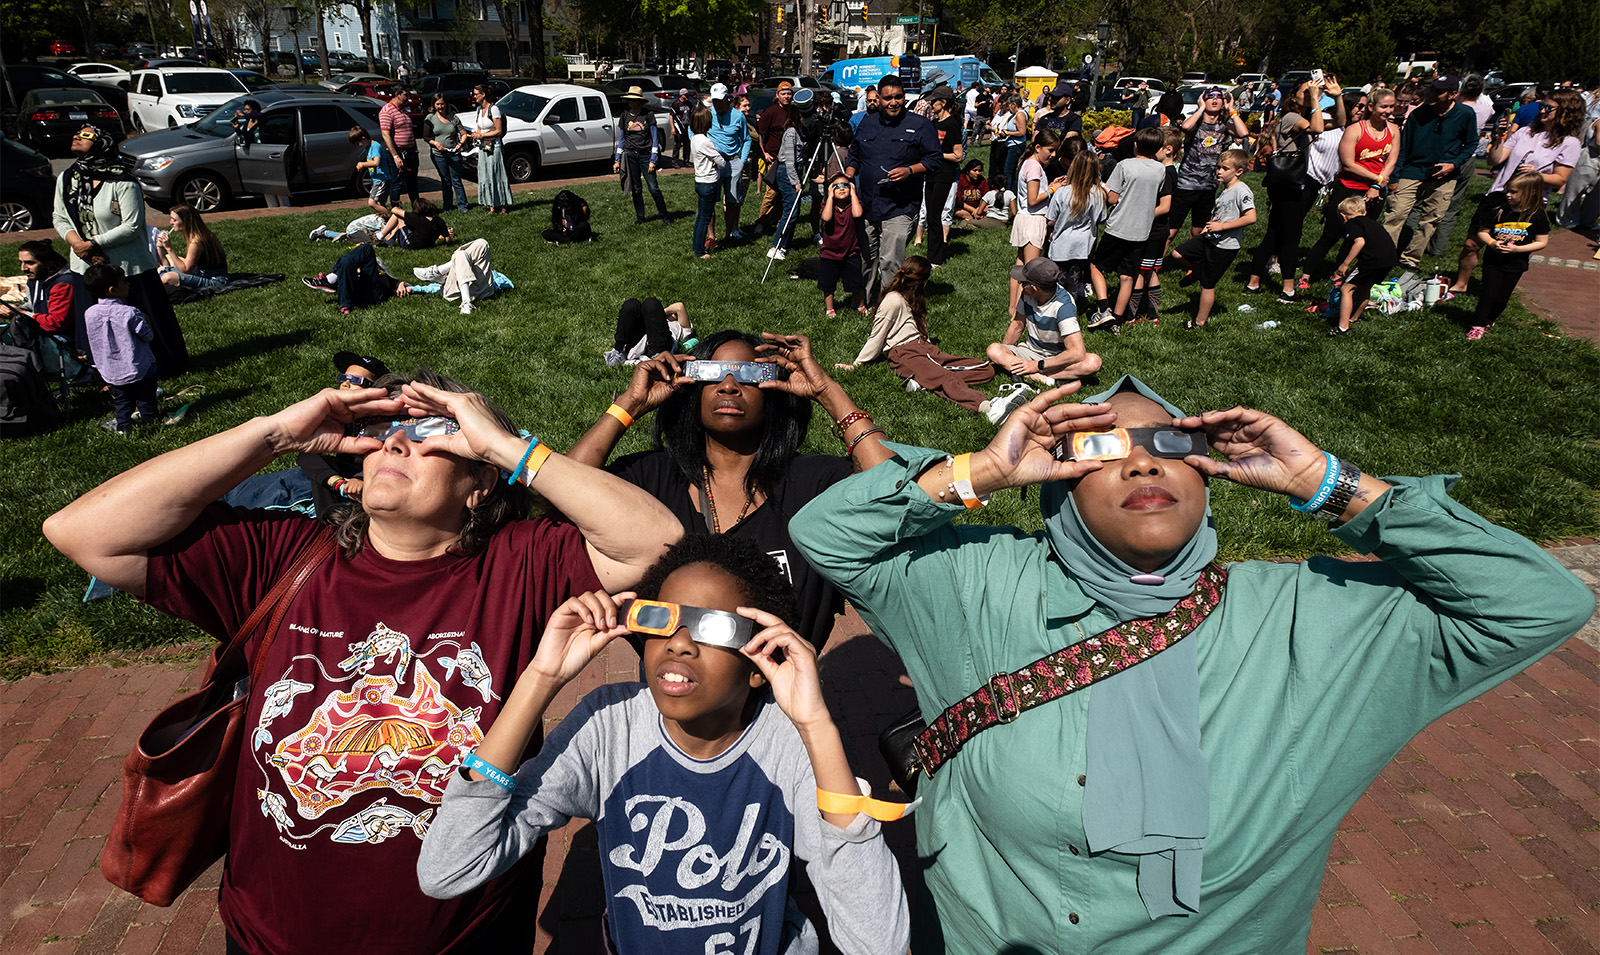 Group of four people wearing safety sunglasses while looking up at a solar eclipse.